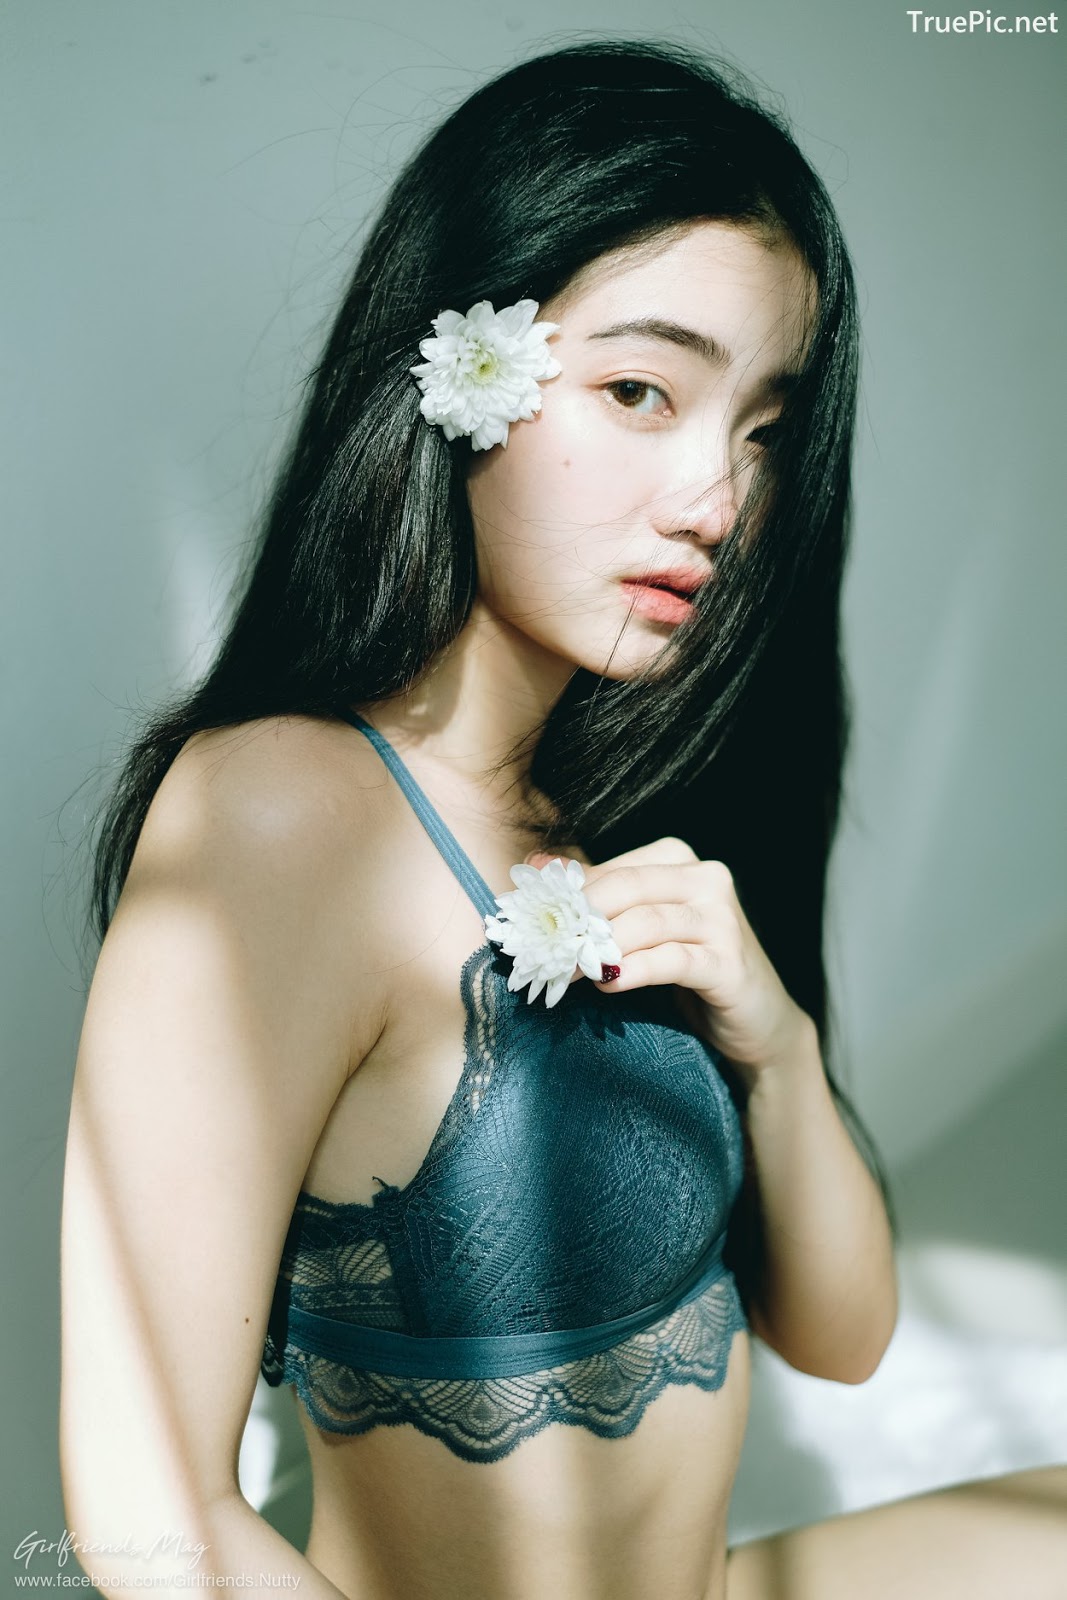 Image Thailand Model - Cholticha Intapuang - Flower In The Room - TruePic.net - Picture-17